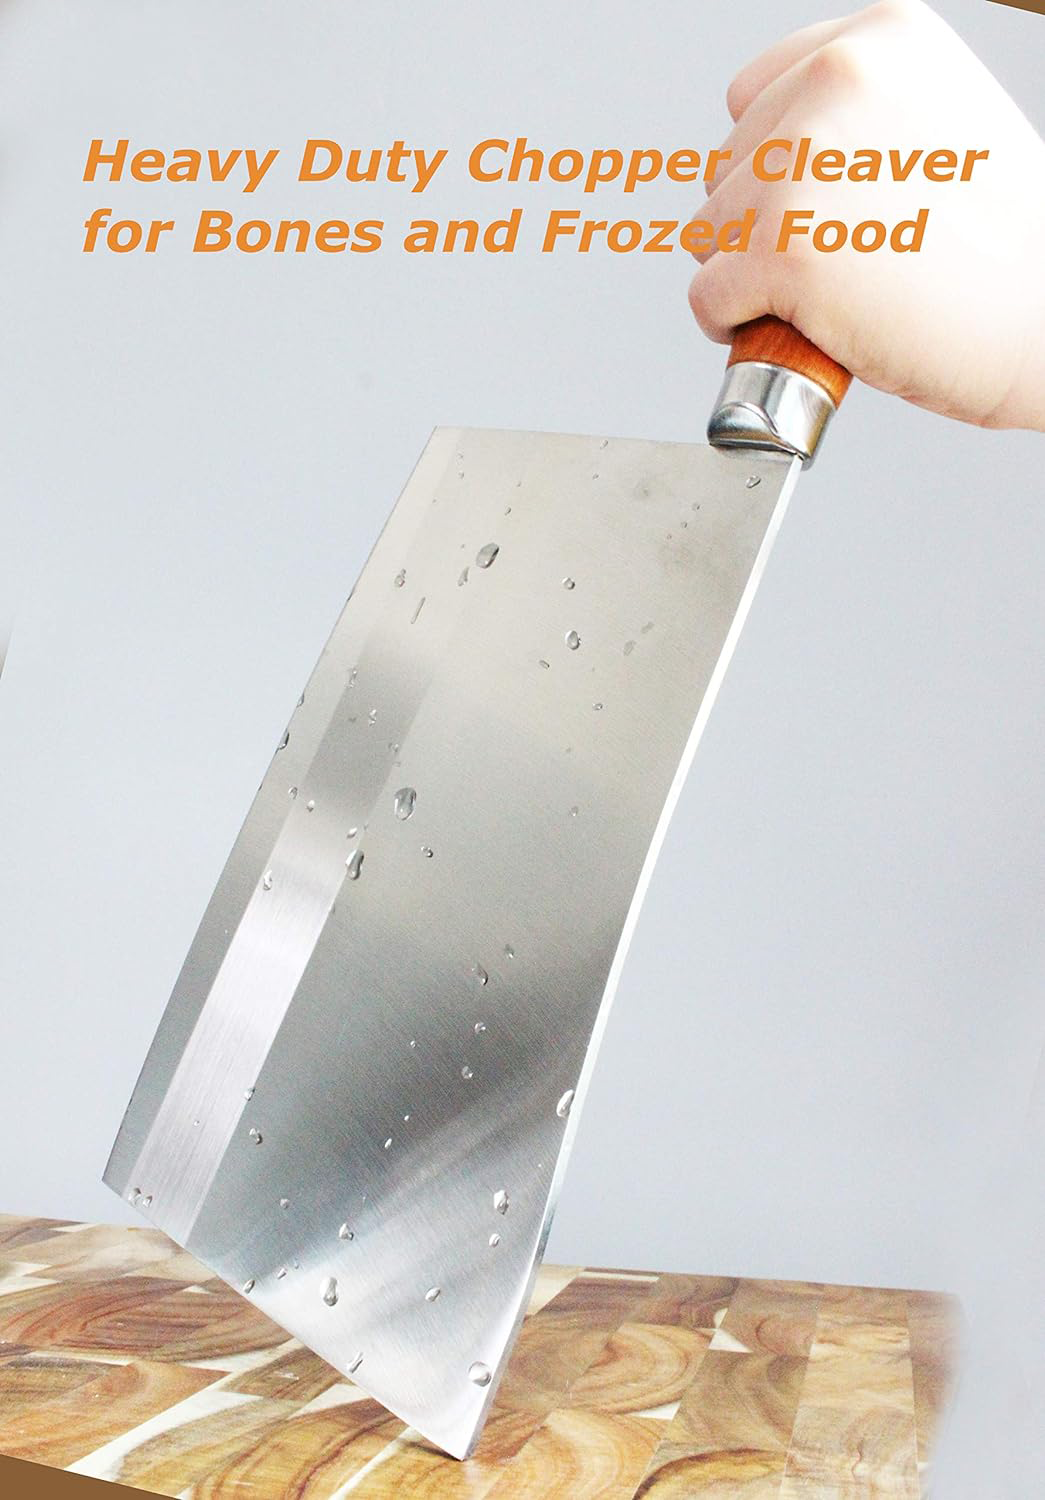 KD Meat Cleaver Professional Chinese Chef Knife Heavy Duty Bone Chopper Kitchen Knife Super Thick Blade